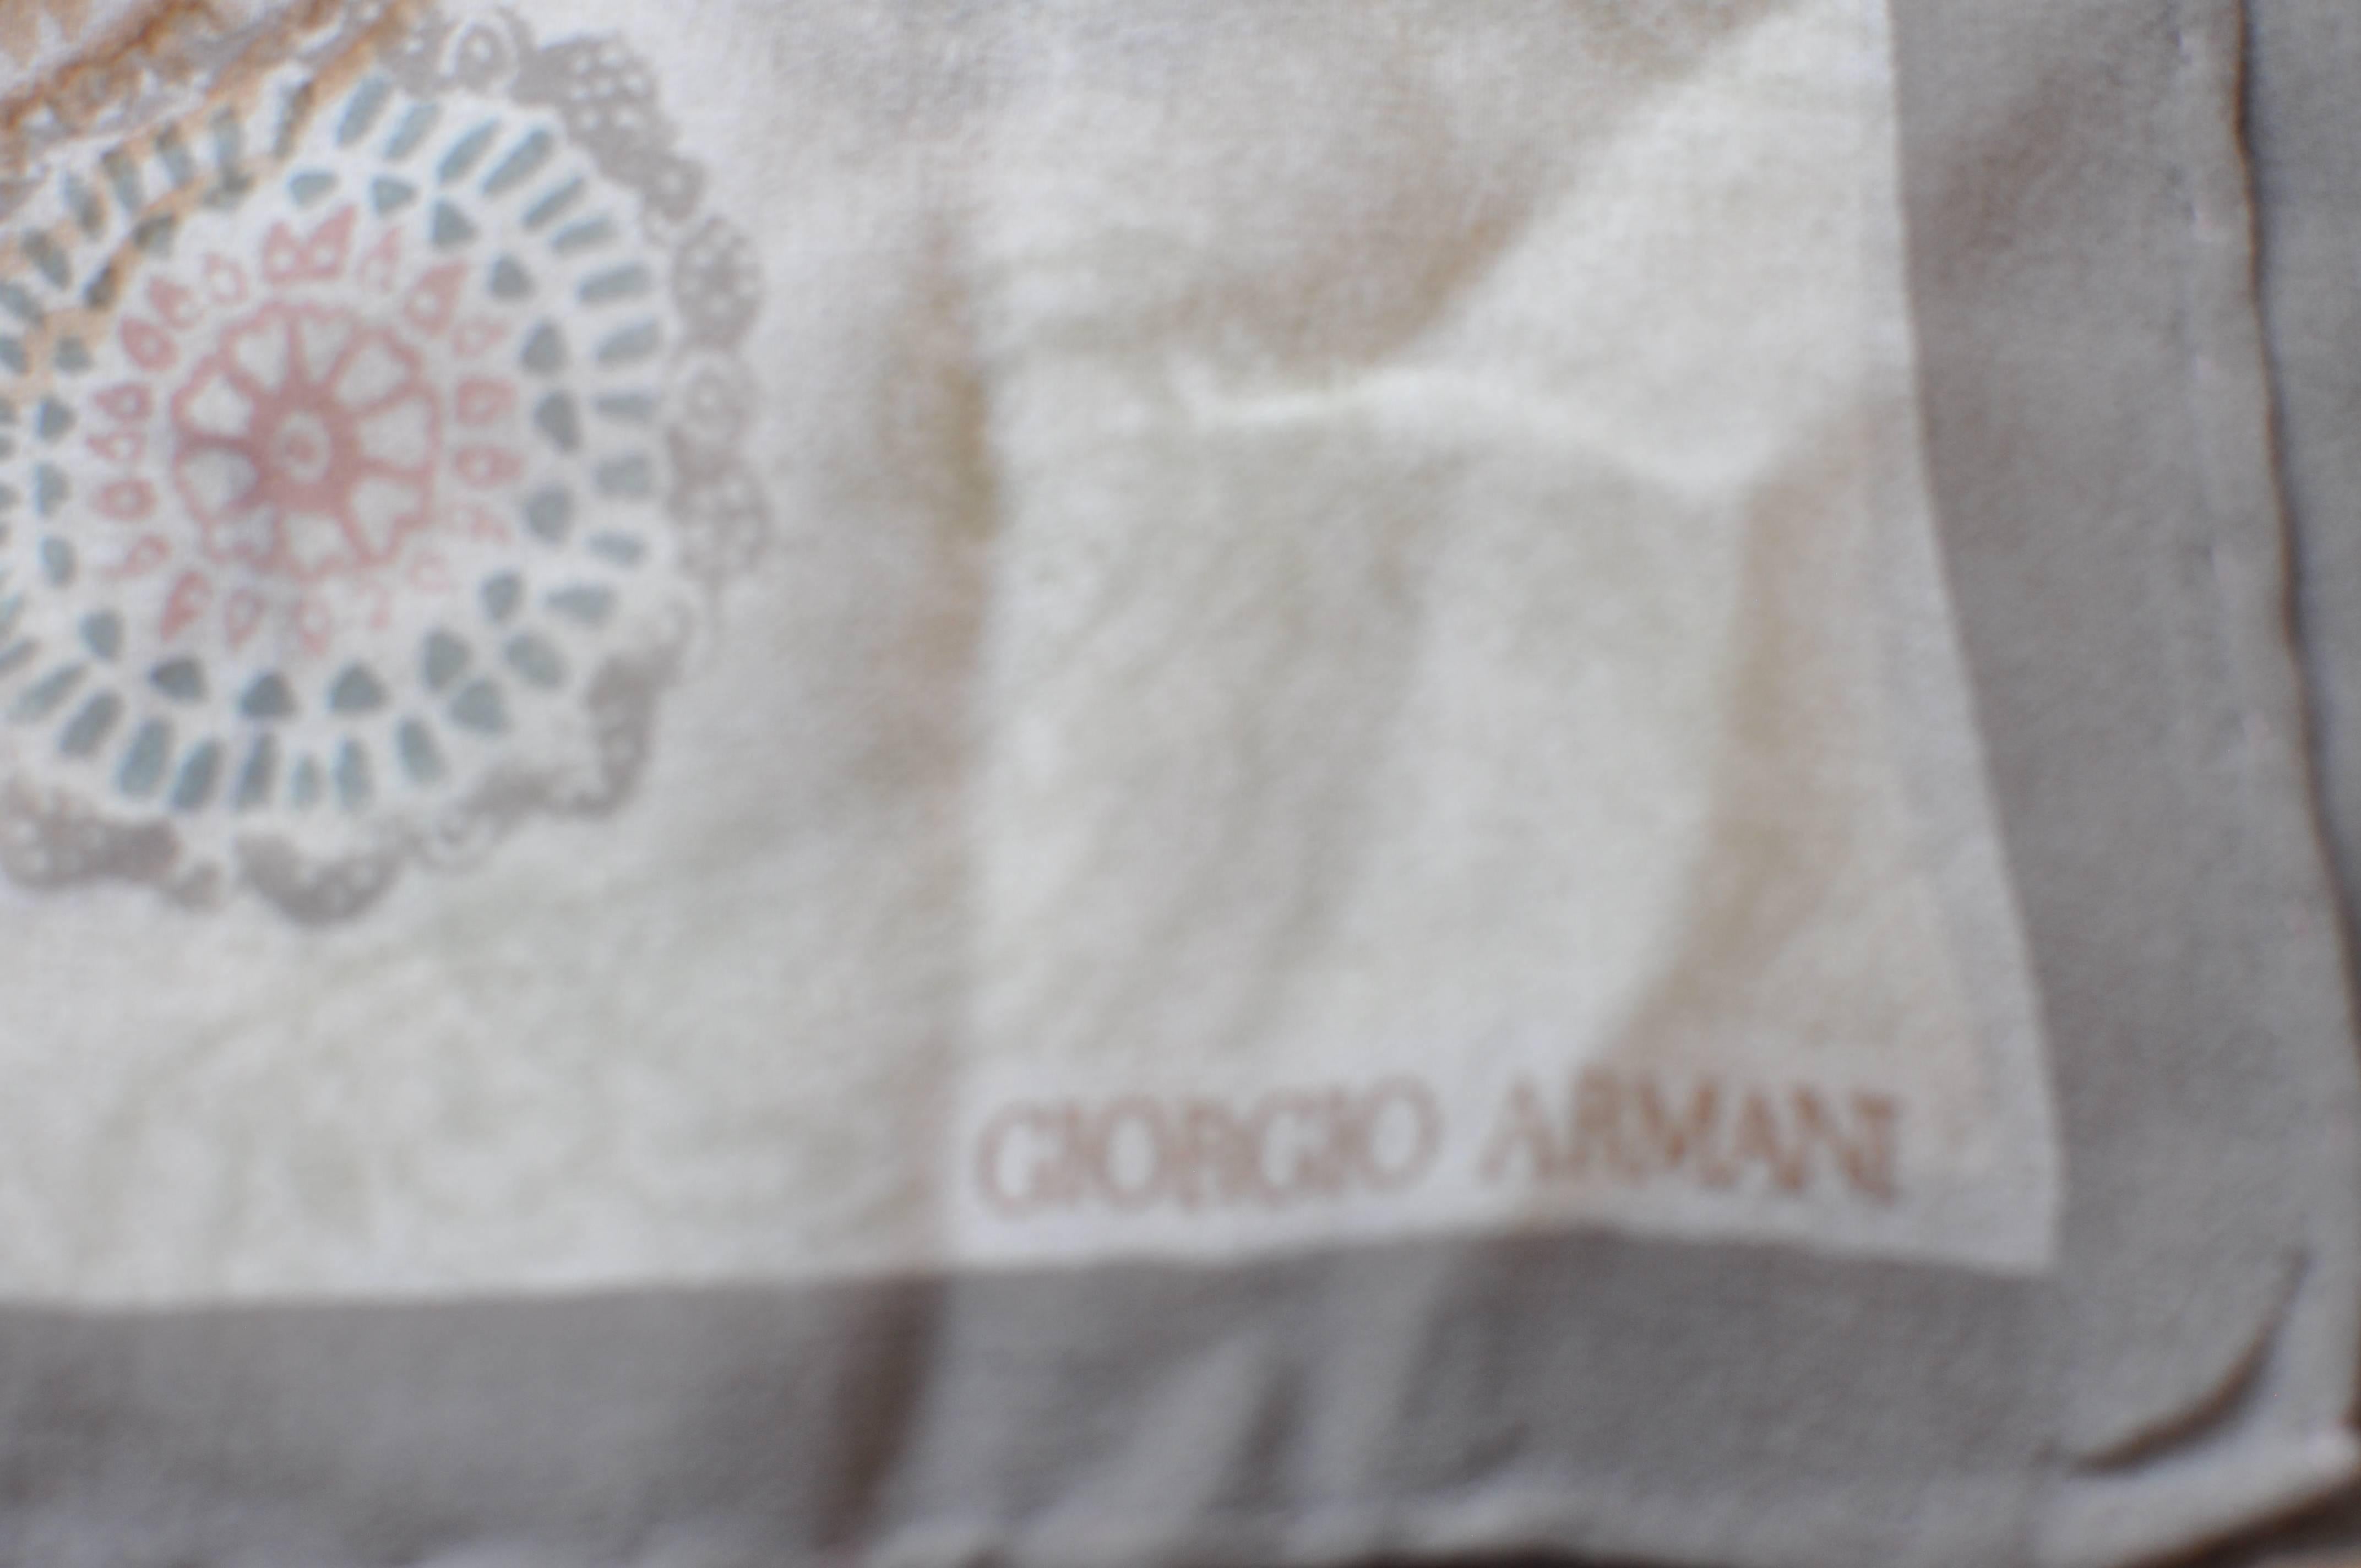 Very nice paisley print scarf by Giorgio Armani in silk chiffon. The grey/brown/beige colors are fairly muted, and will go well with almost every outfit.

The hand rolled edges are nice and plump.